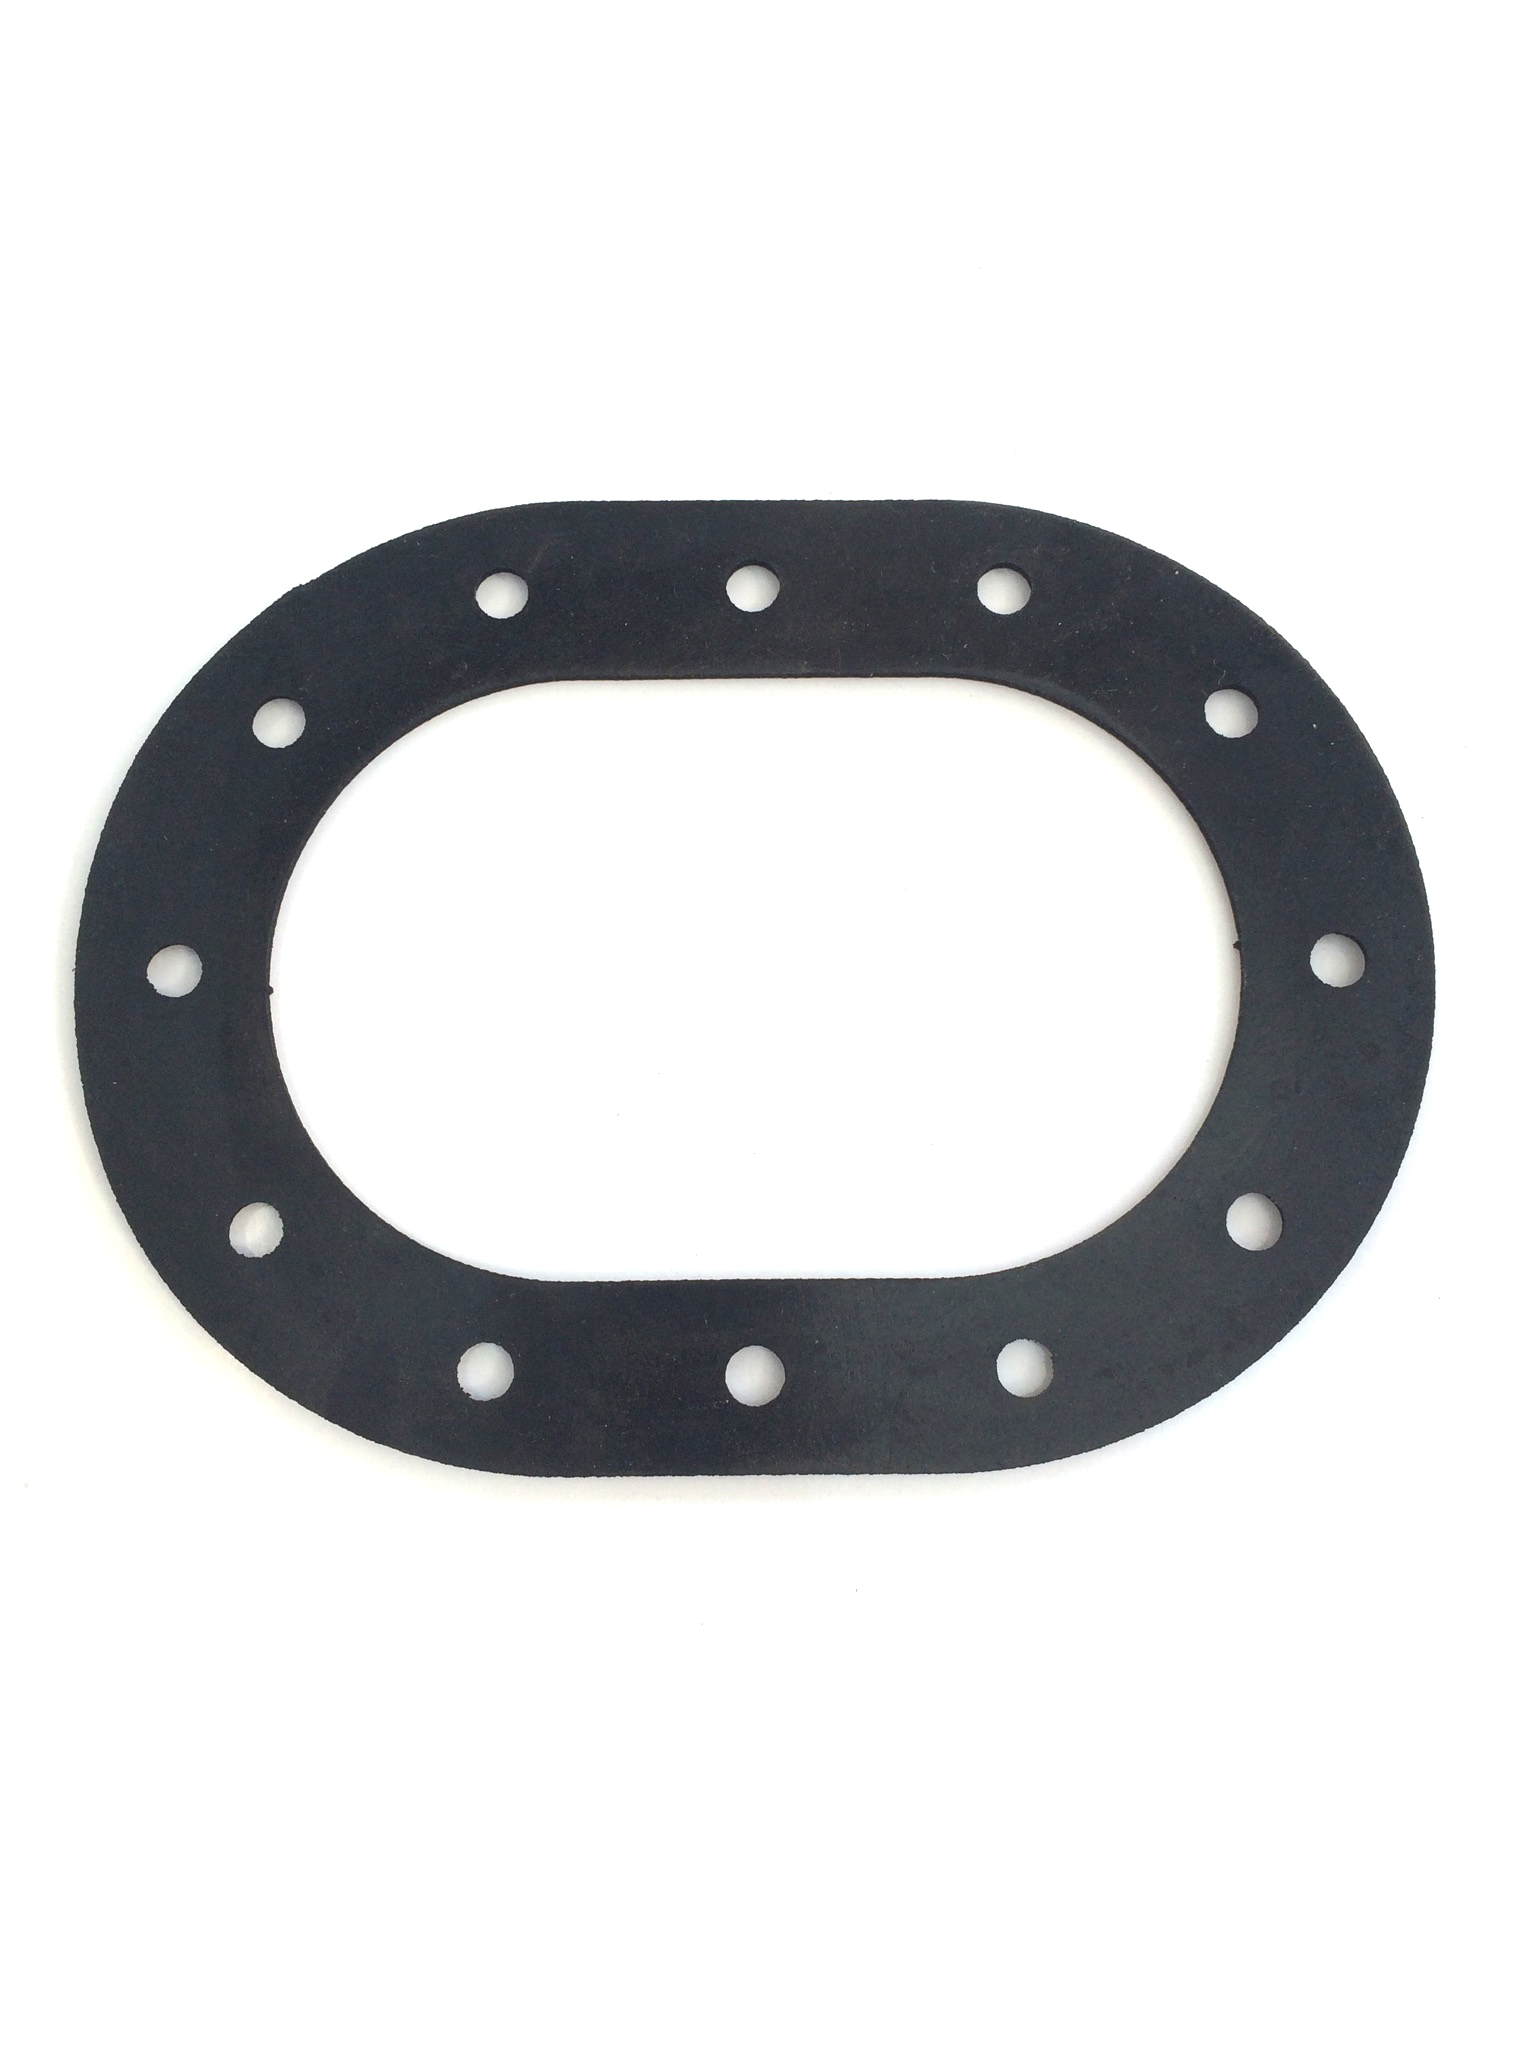 Superior Fuel Cells FCC-MOLDTOPGASKET Fuel Cell Fill Plate Gasket, 12-Bolt, 4 x 6 in Oval, Each